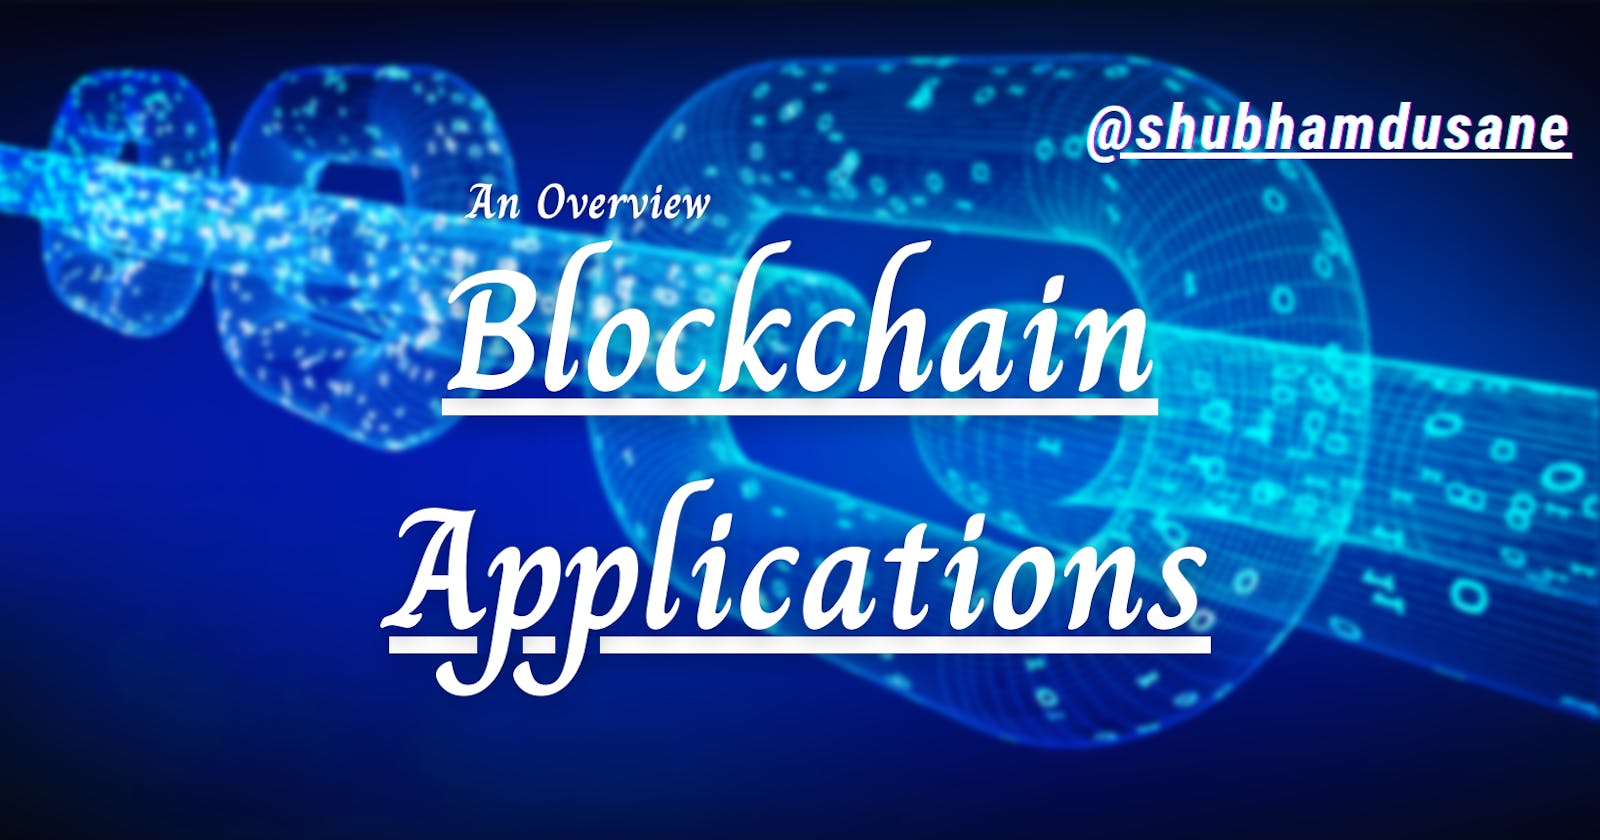 An overview of the blockchain applications deve